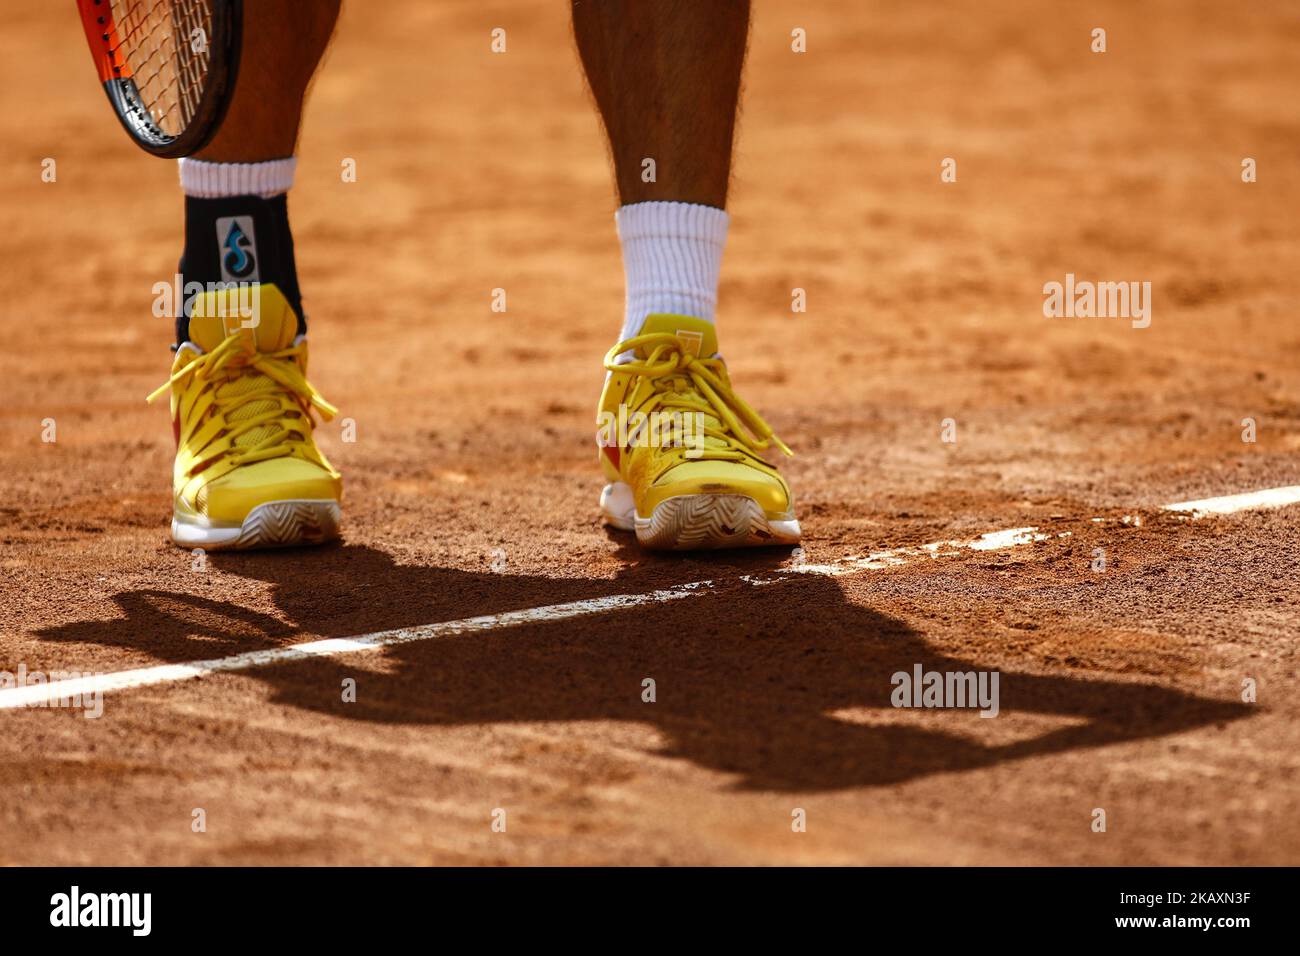 Kei Nishikori from Japan Nike shoes during the Barcelona Open Banc Sabadell 66 Trofeo Conde de Godo at Reial Club Tenis Barcelona 24 of April of 2018 in Barcelona. (Photo by